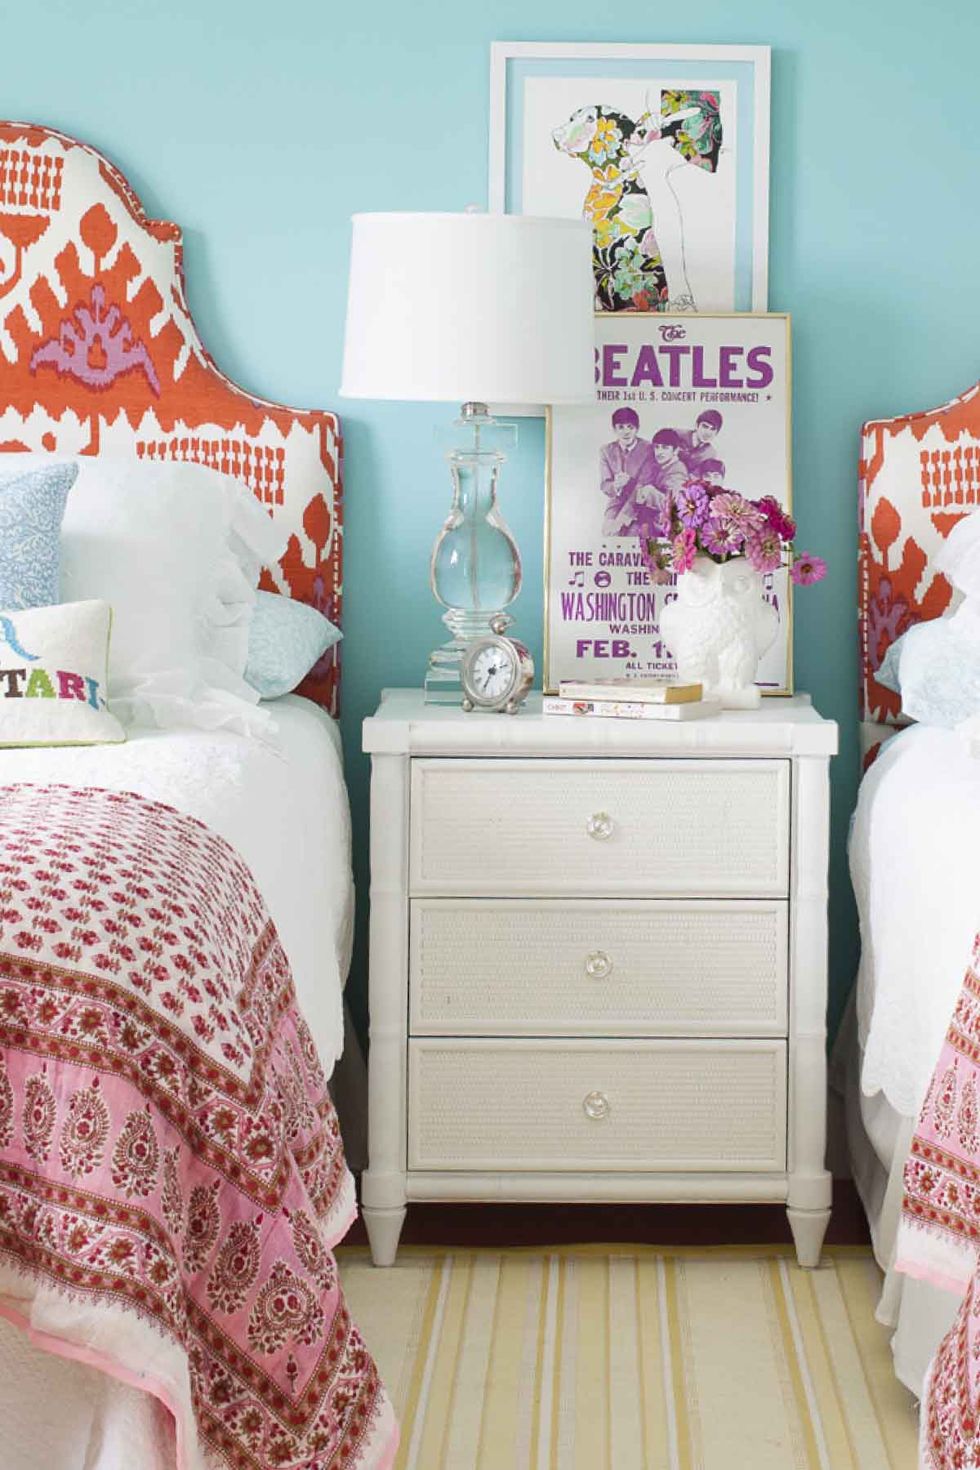 12 Fun Girl'S Bedroom Decor Ideas - Cute Room Decorating For Girls